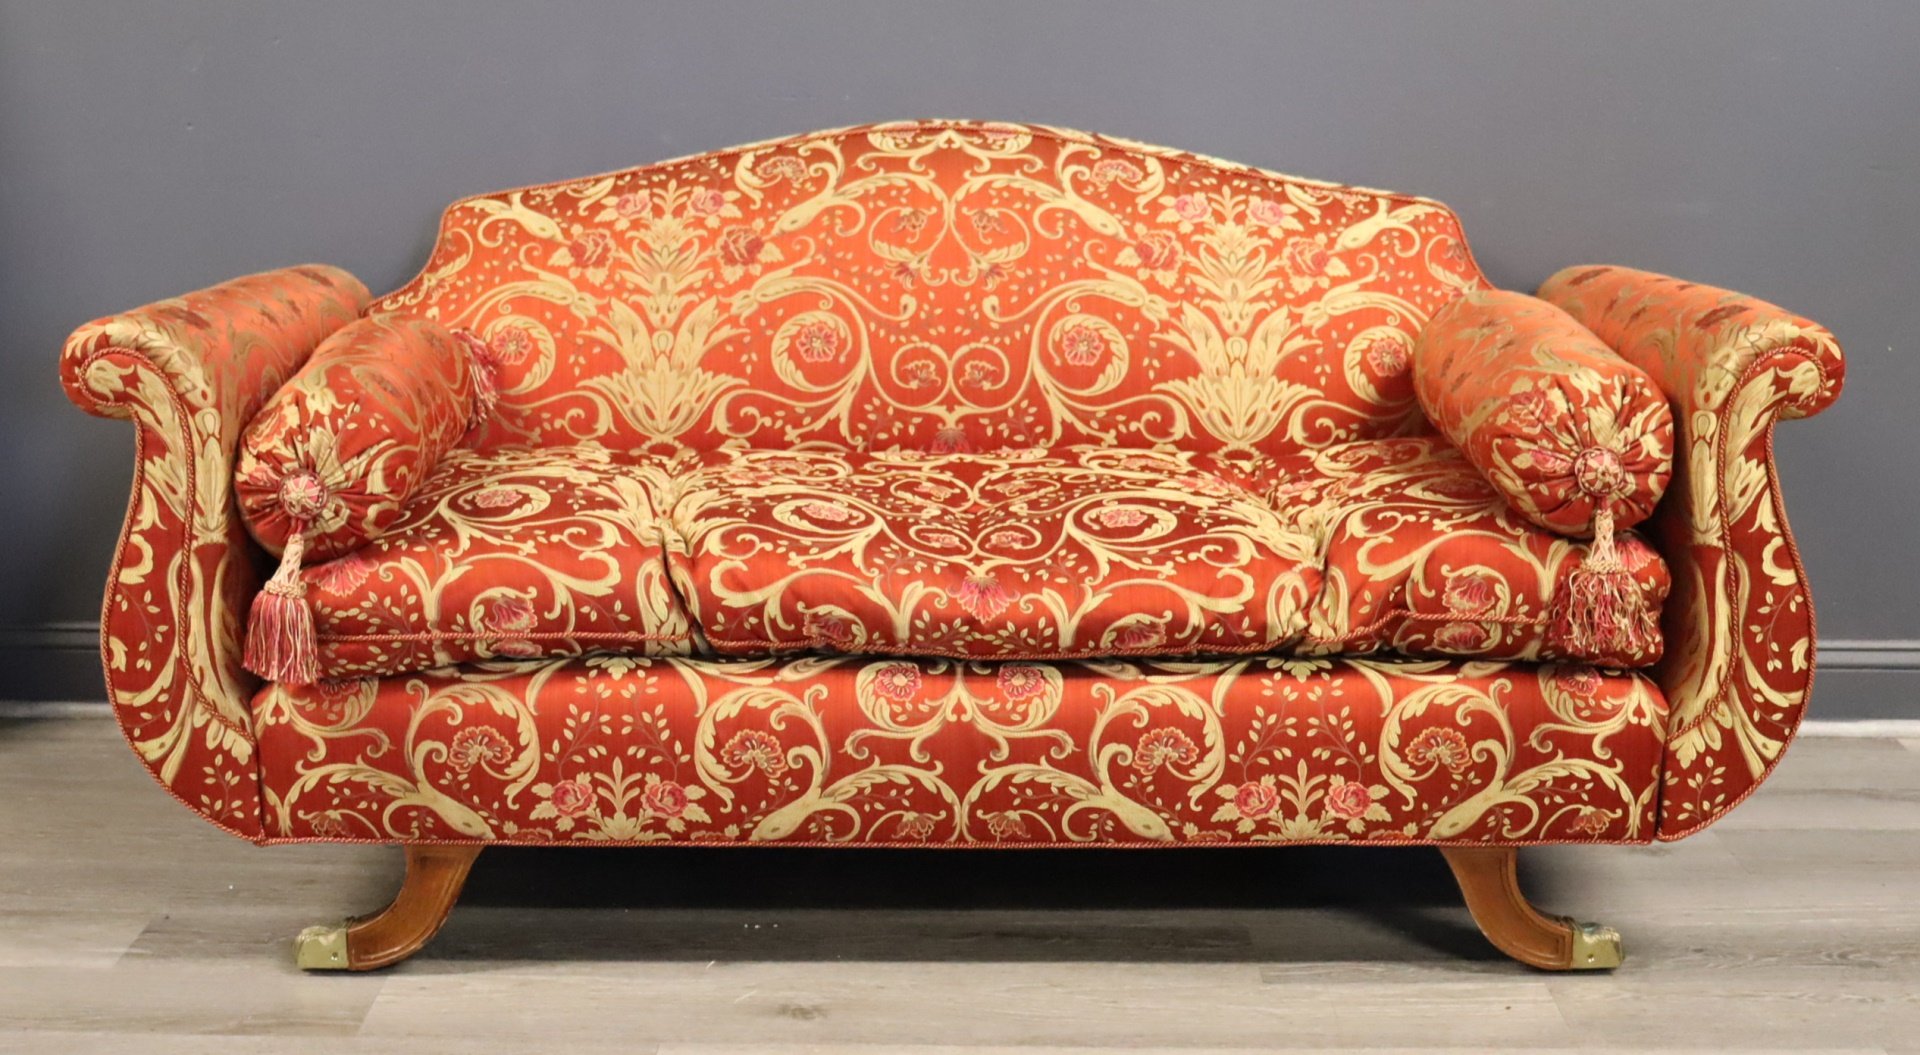 EMPIRE STYLE UPHOLSTERED SCROLL